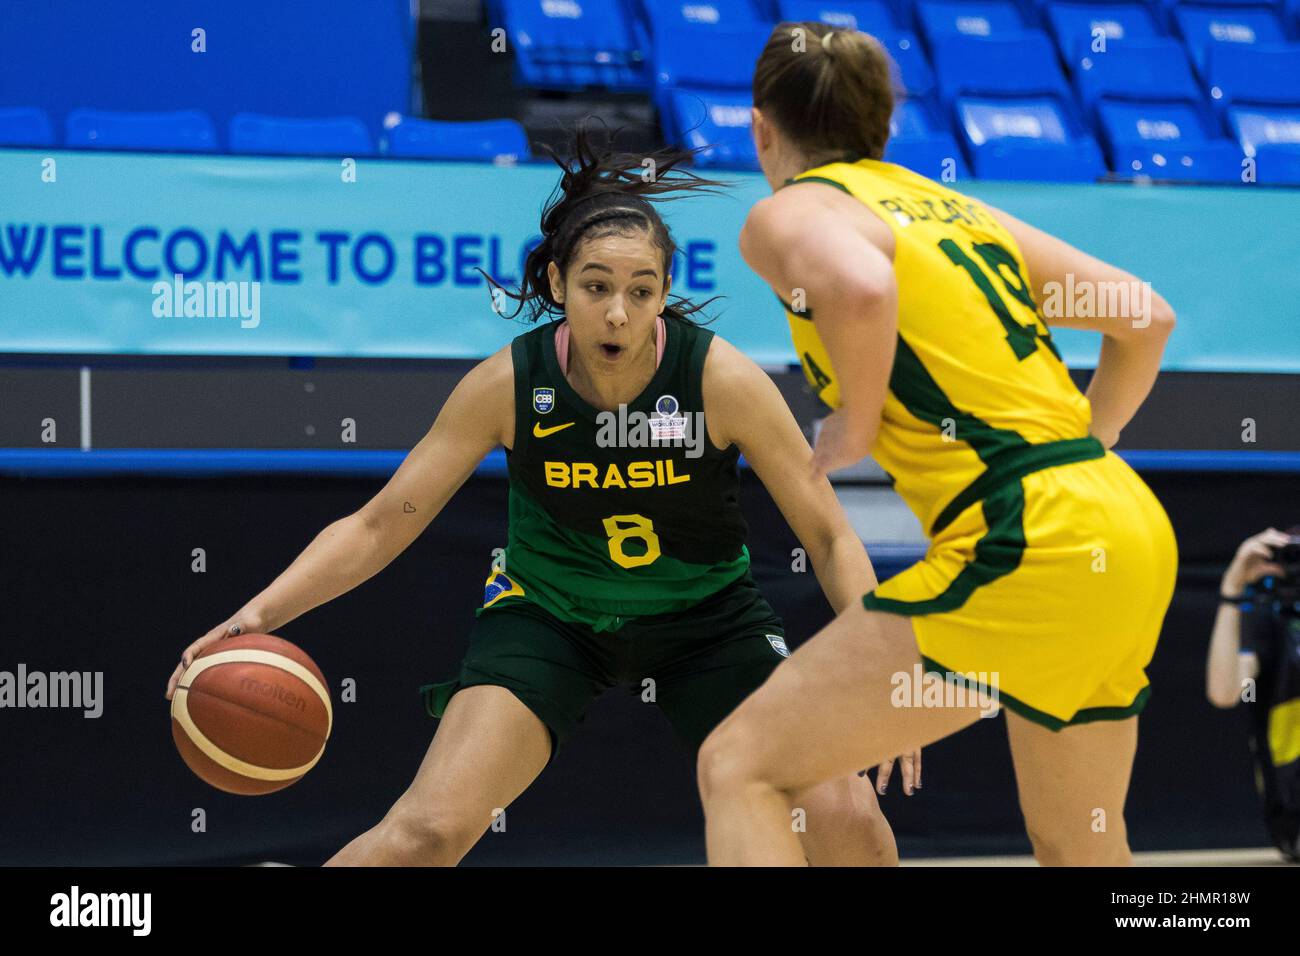 Belgrade, Serbia, 10th February 2022. Taina Paixao of Brazil takes on the opposite player during the FIBA Women's Basketball World Cup Qualifying Tournament match between Australia v Brazil in Belgrade, Serbia. February 10, 2022. Credit: Nikola Krstic/Alamy Stock Photo